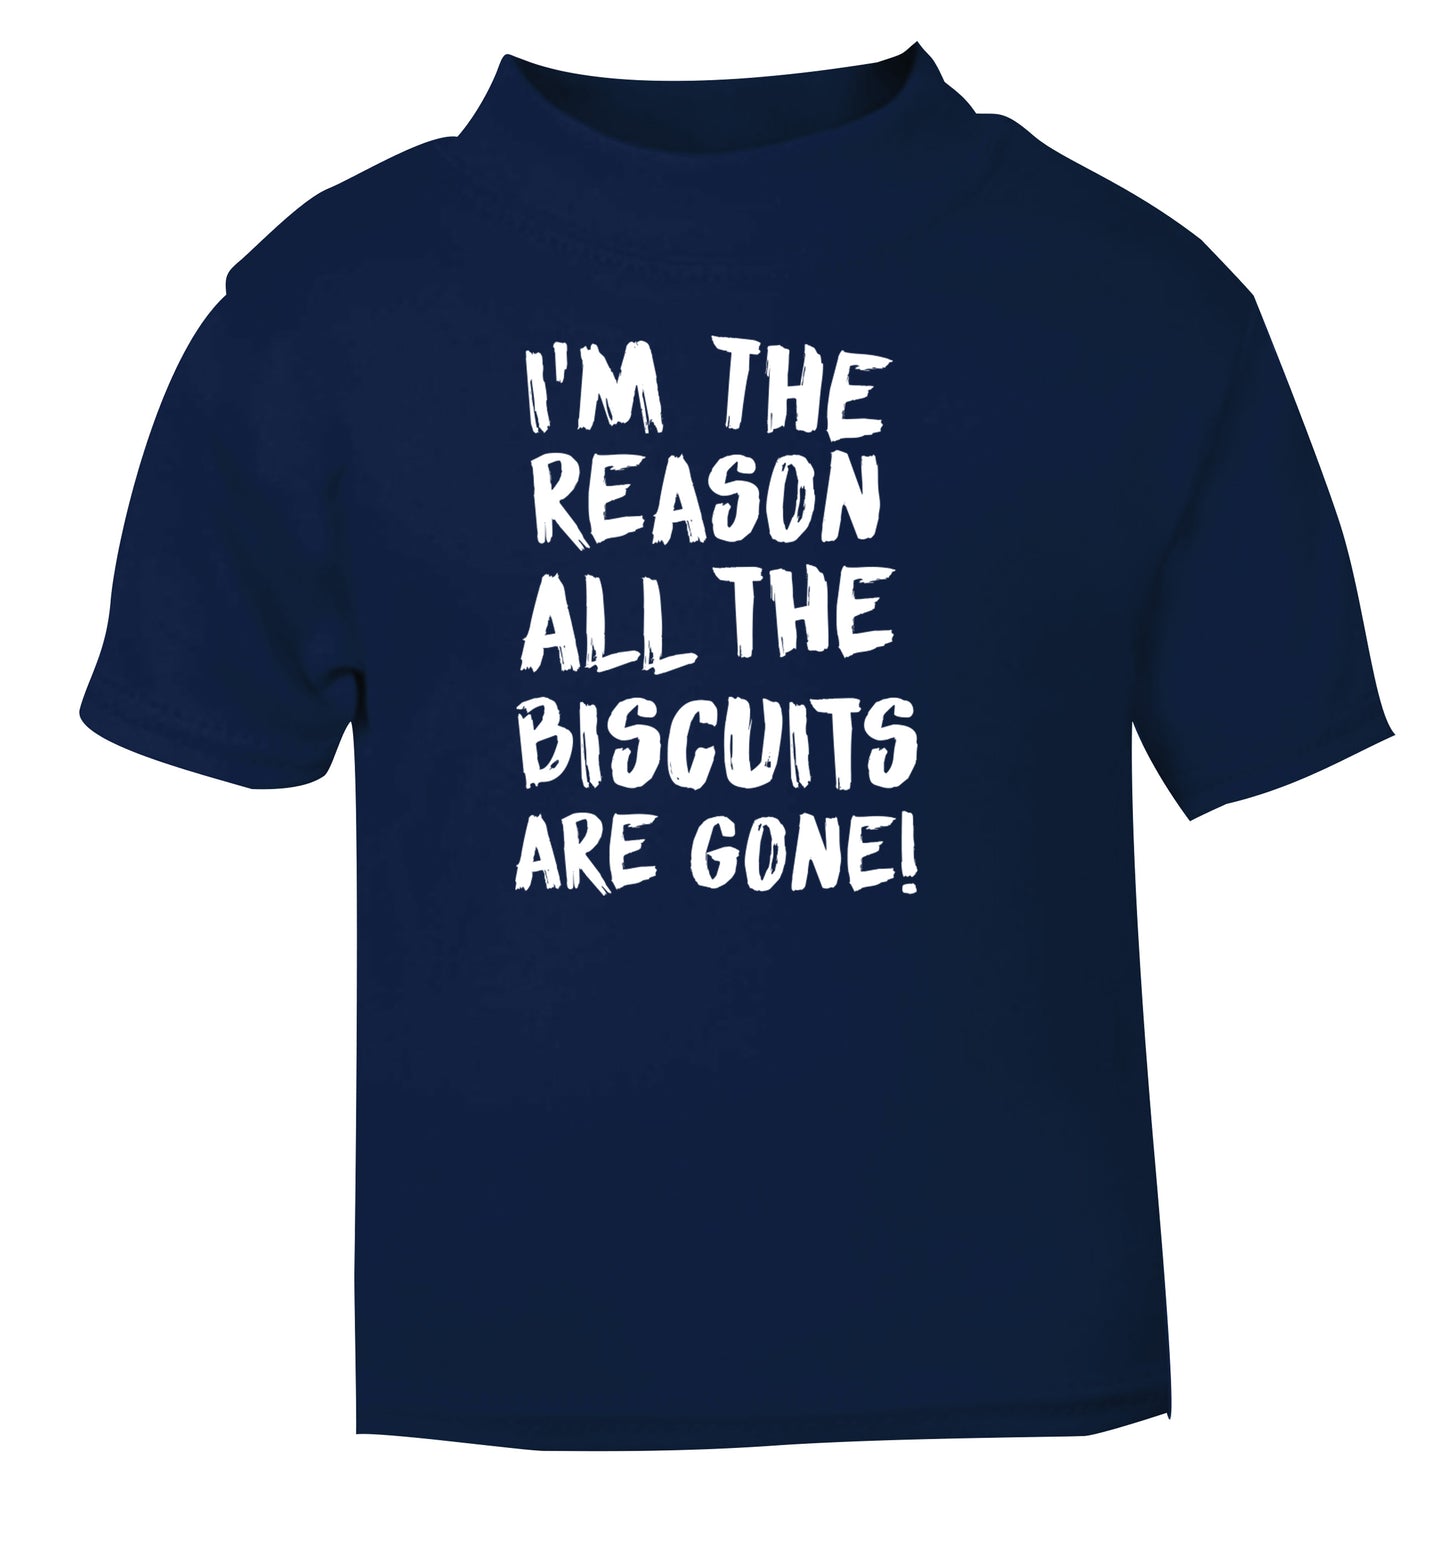 I'm the reason why all the biscuits are gone navy Baby Toddler Tshirt 2 Years